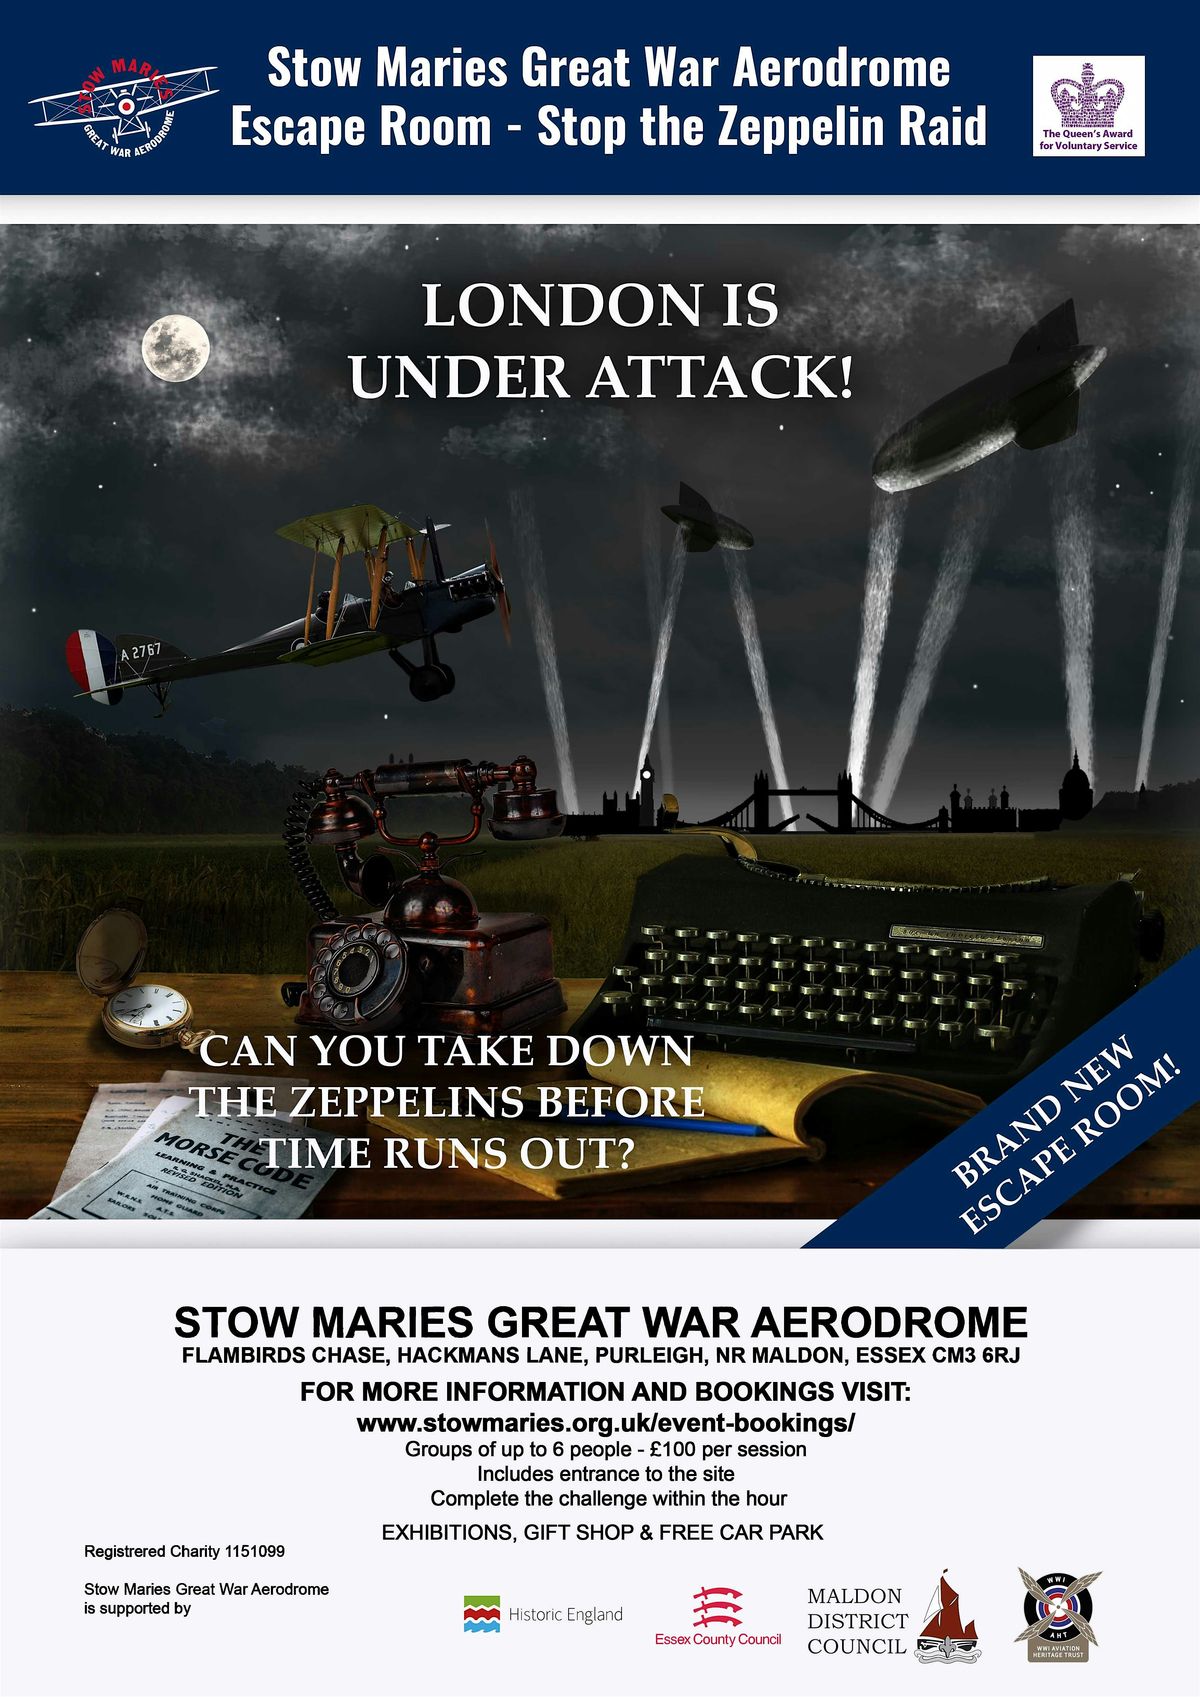 Stow Maries Great War Aerodrome Escape Room Experience 21 April